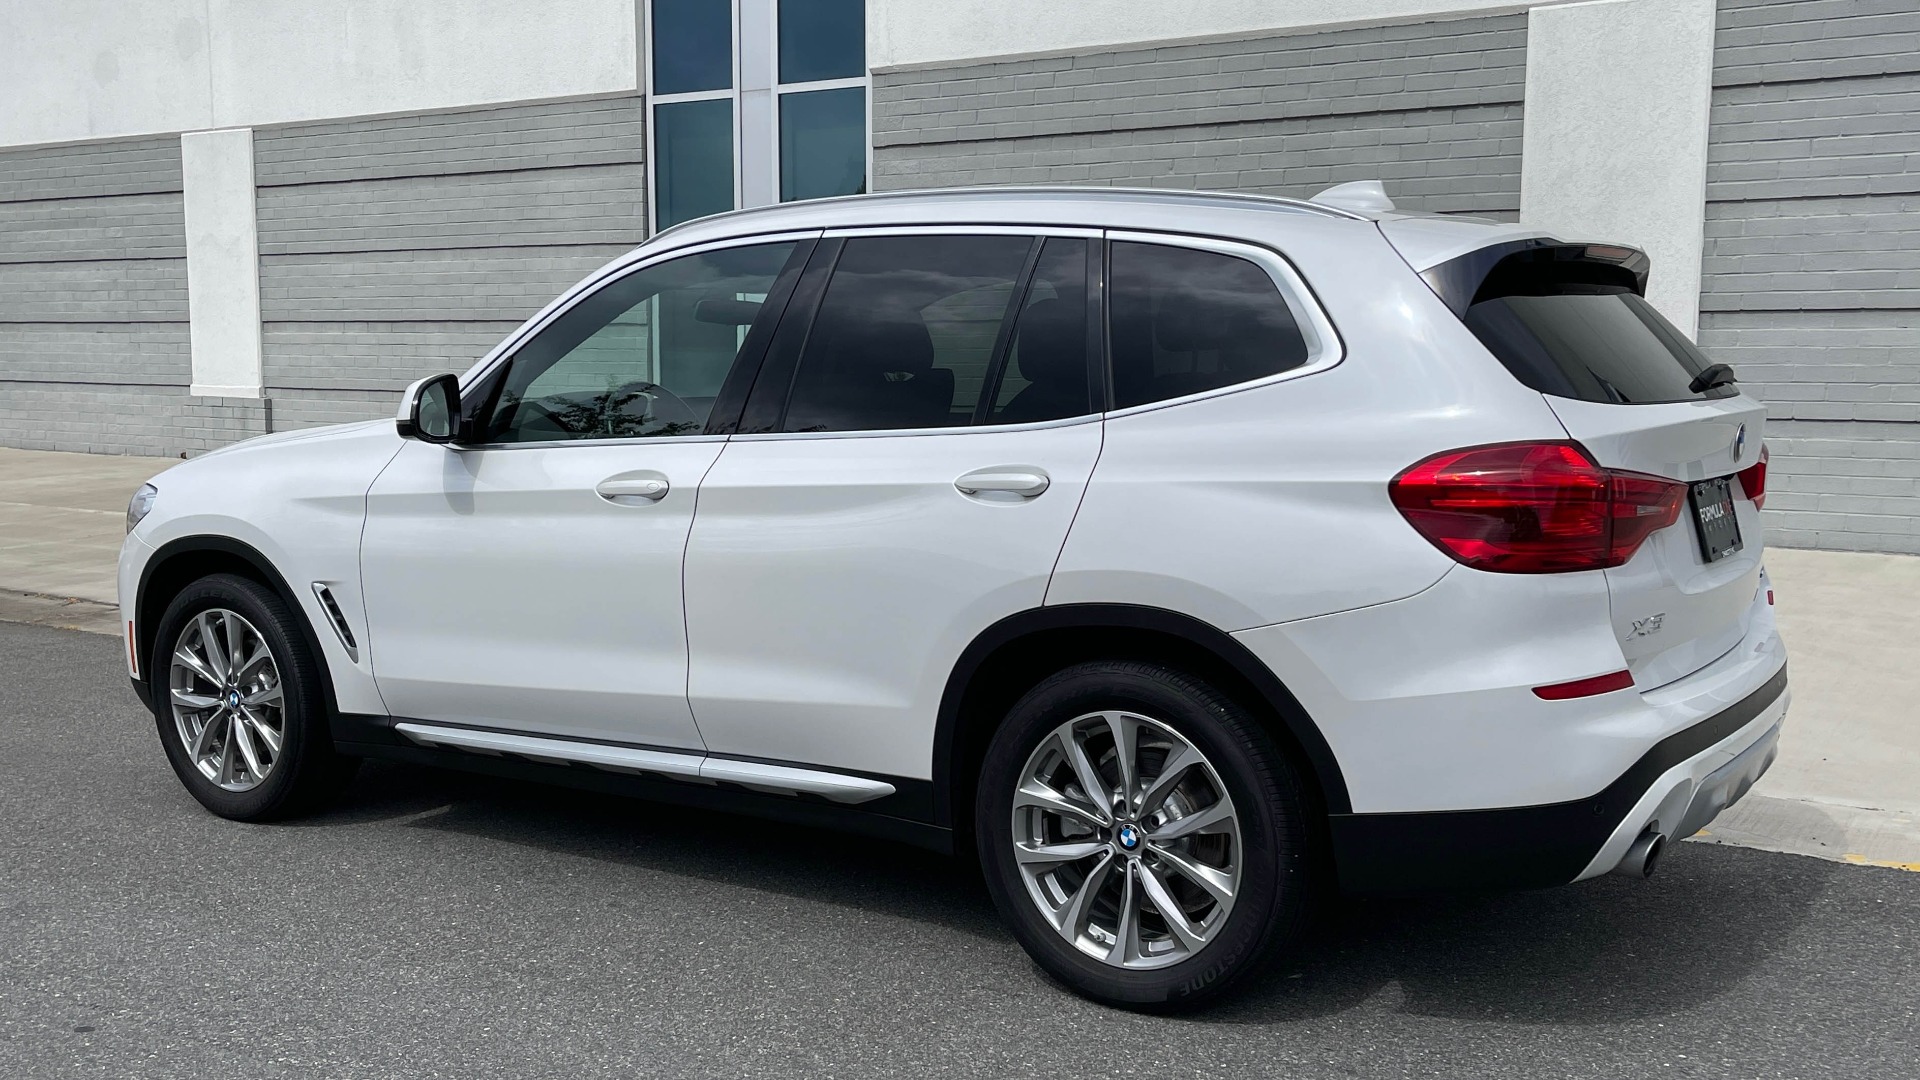 Used 2018 BMW X3 XDRIVE30I / NAV / PANO-ROOF / HTD STS / PARK DIST CNTRL / REARVIEW for sale Sold at Formula Imports in Charlotte NC 28227 4